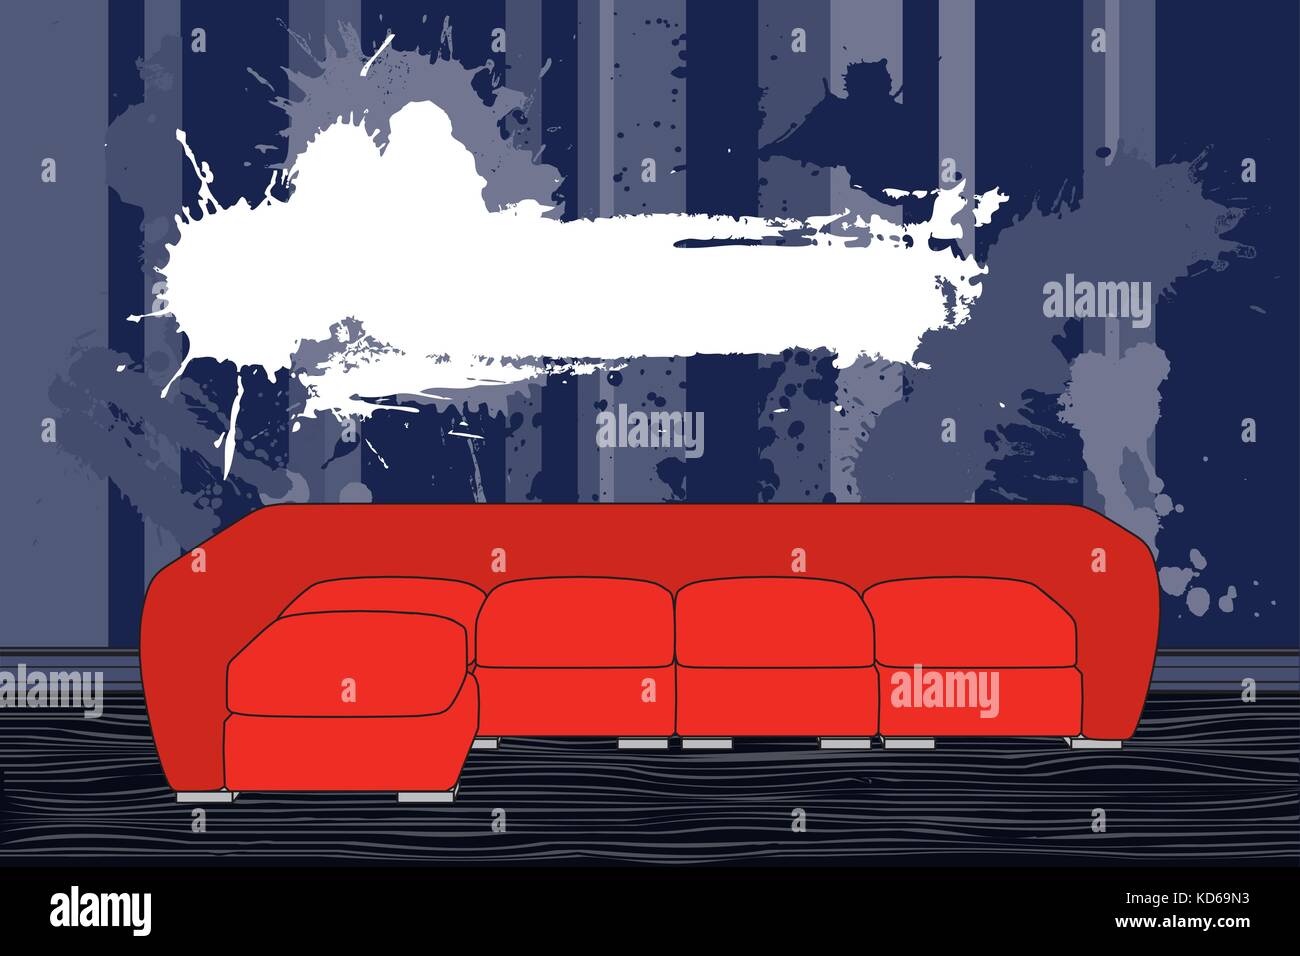 Red divan with splashes on the wall Stock Vector